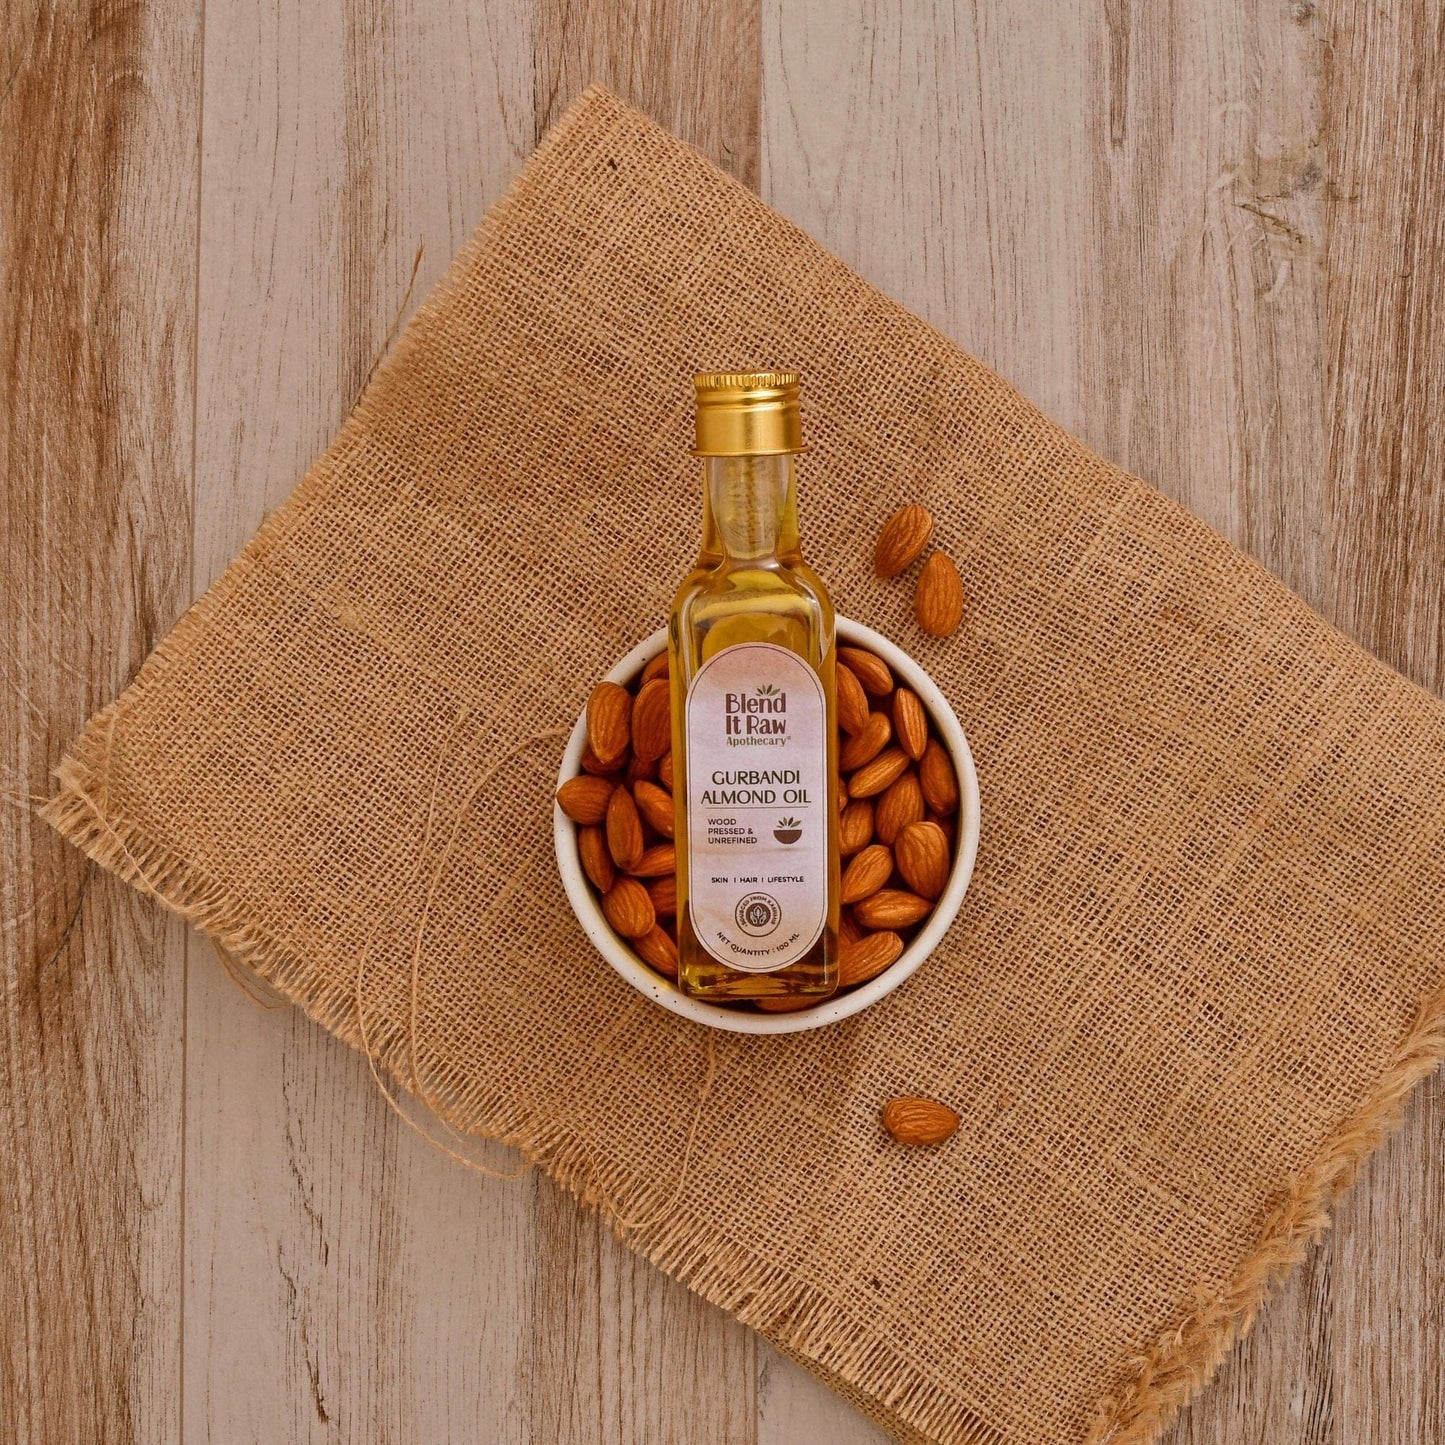 Cold pressed gurbandi almond oil - Blend It Raw Apothecary